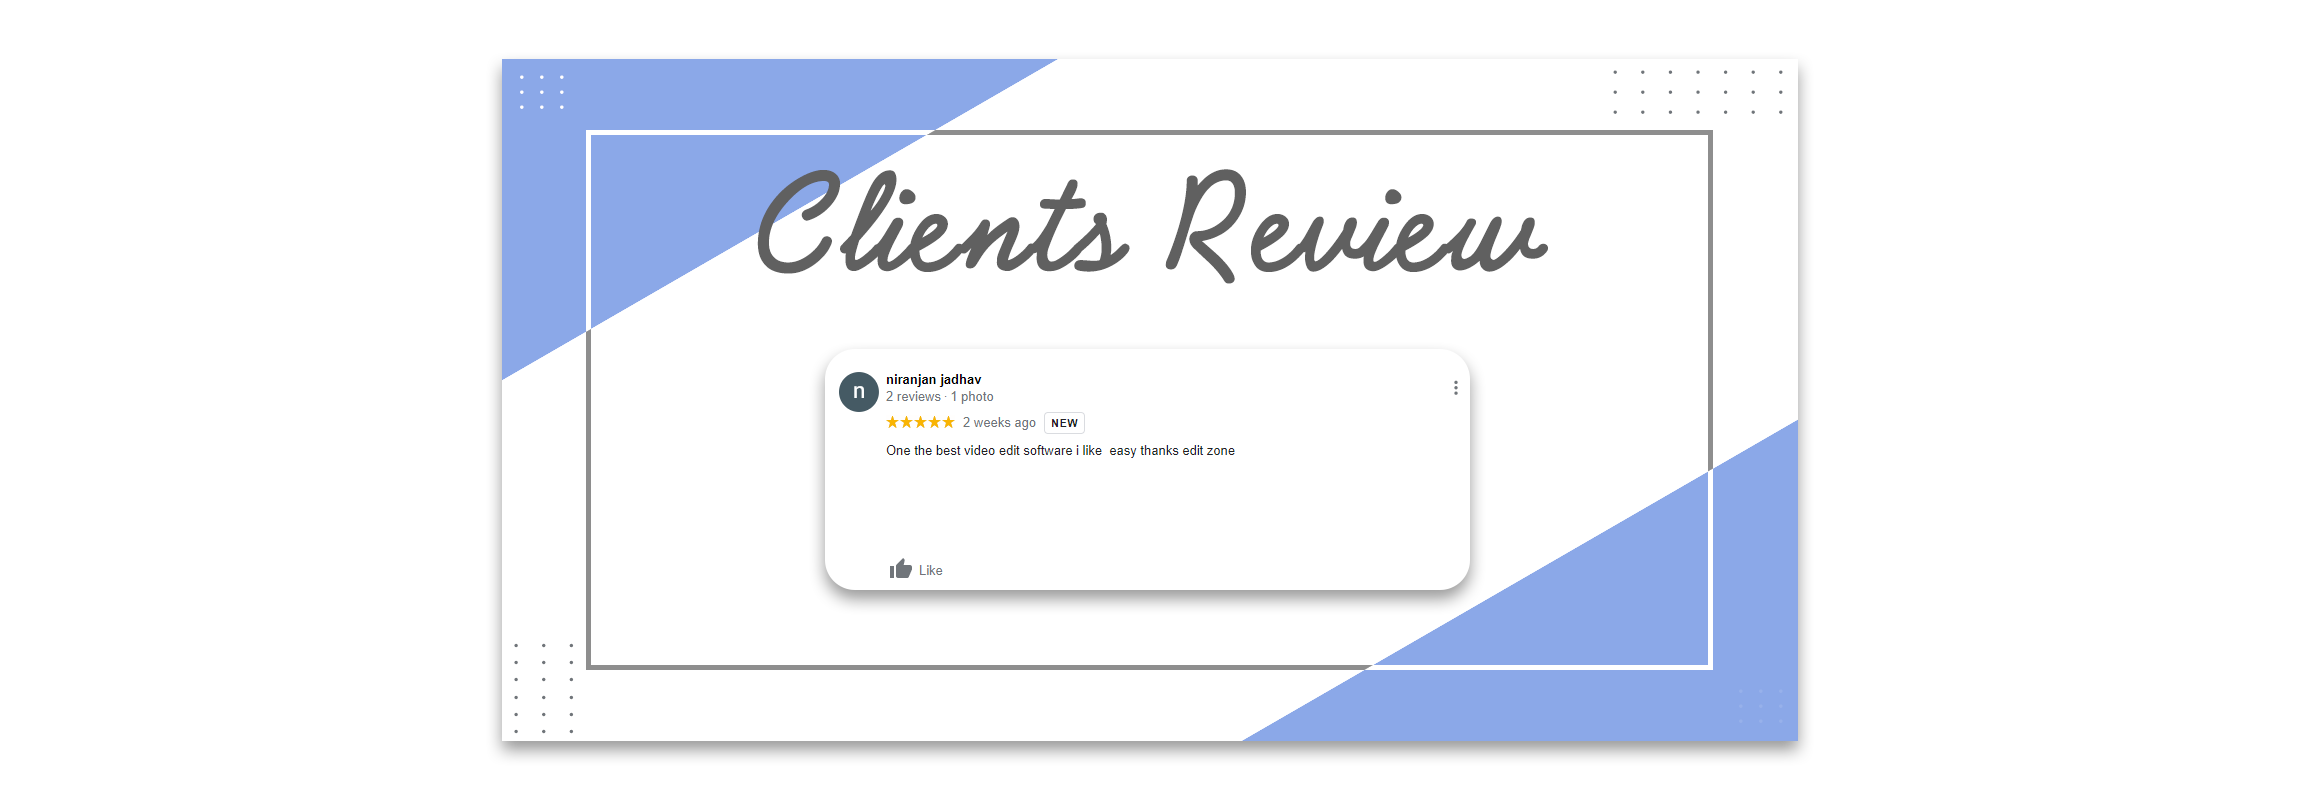 google client review img edit zone india 7